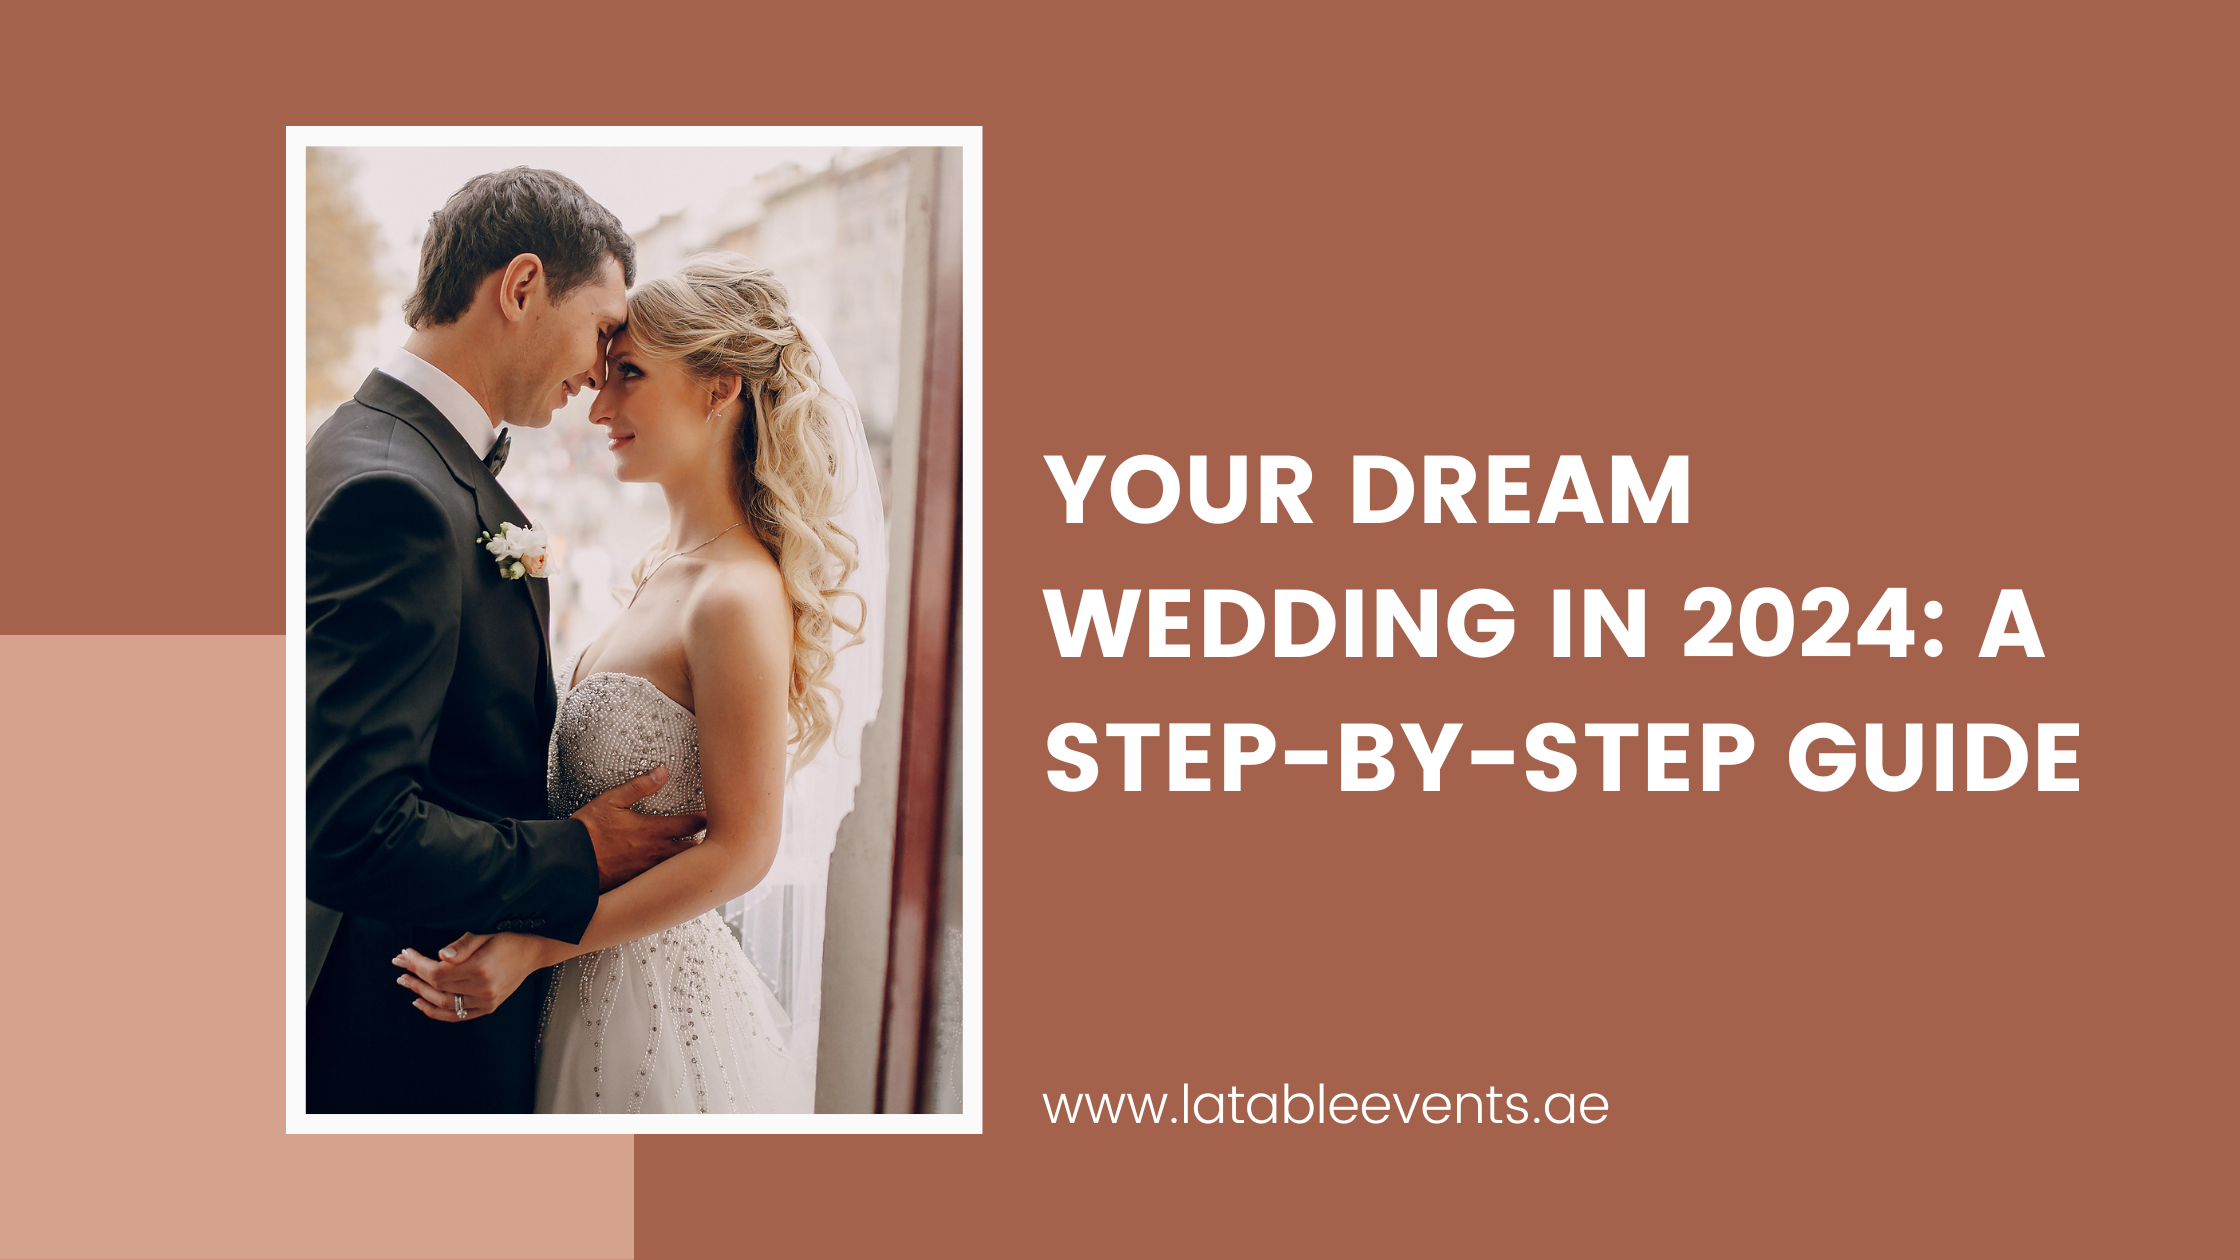 Your Dream Wedding in 2024 A Step-by-Step Guide